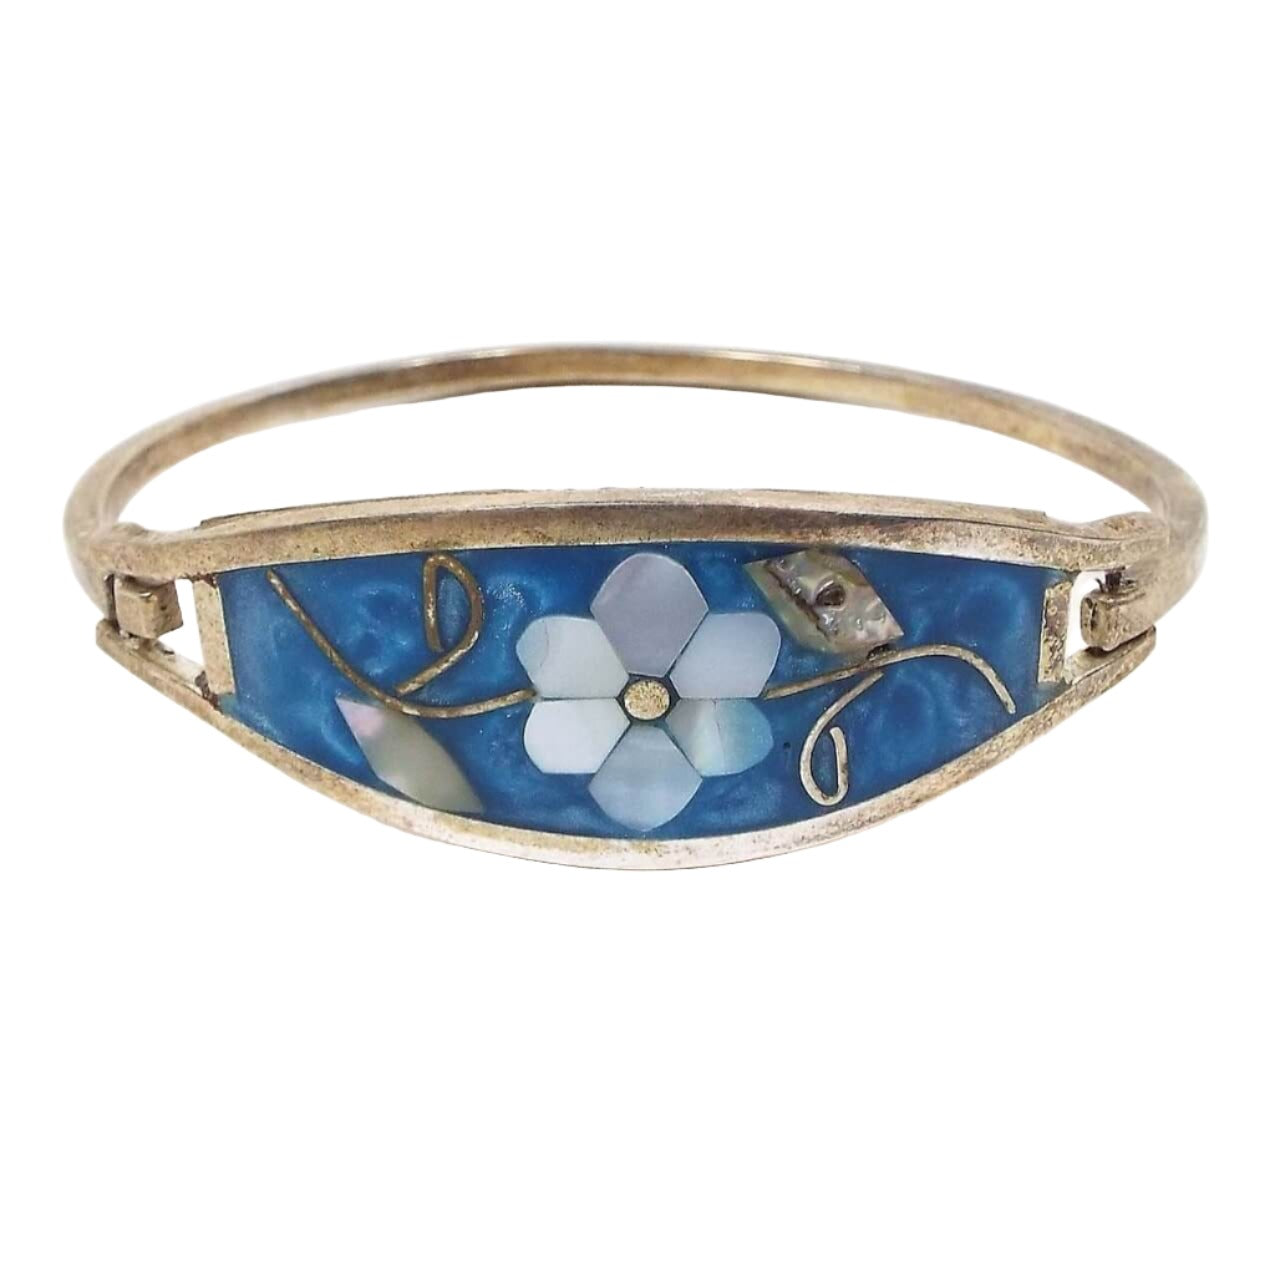 Front view of the Mexican Alpaca hinged bangle. It's silver in color with a curved metal band on the back and split double bands of metal on the front. In between is a curved shaped piece that has pearly blue resin. In the middle is a flower design with leaves and stem. The flower petals are mother of pearl shell and are pearly white color. The leaves are abalone shell and are pearly multi color. The stem is metal. One side has a metal hook style piece so you can open and close the bangle.  